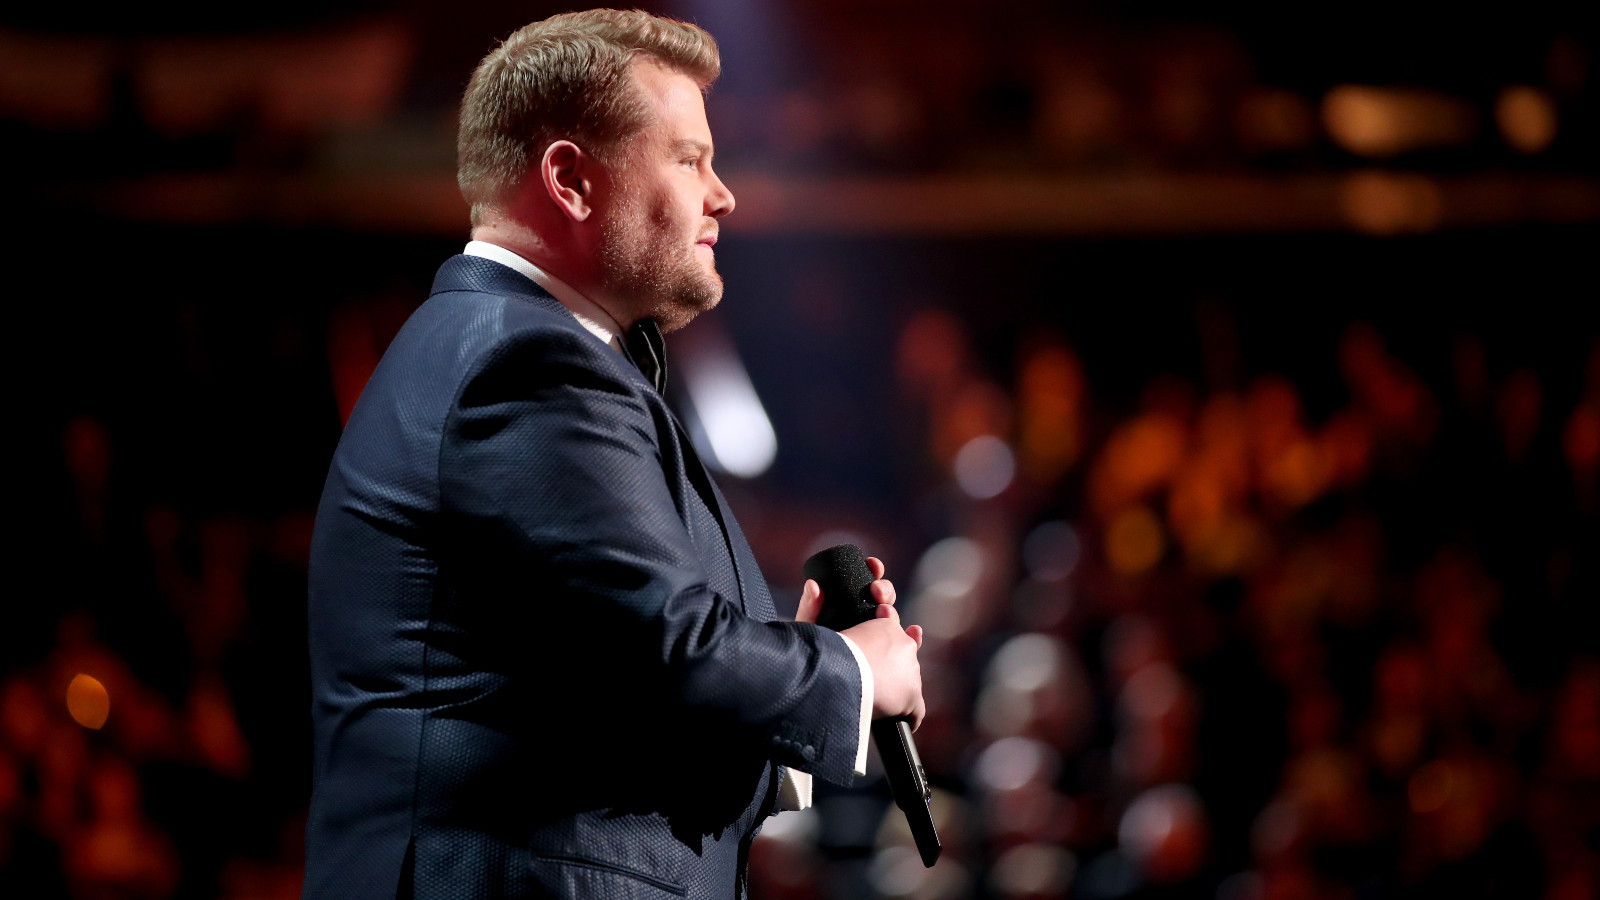 James Corden Late Late Night Show Host